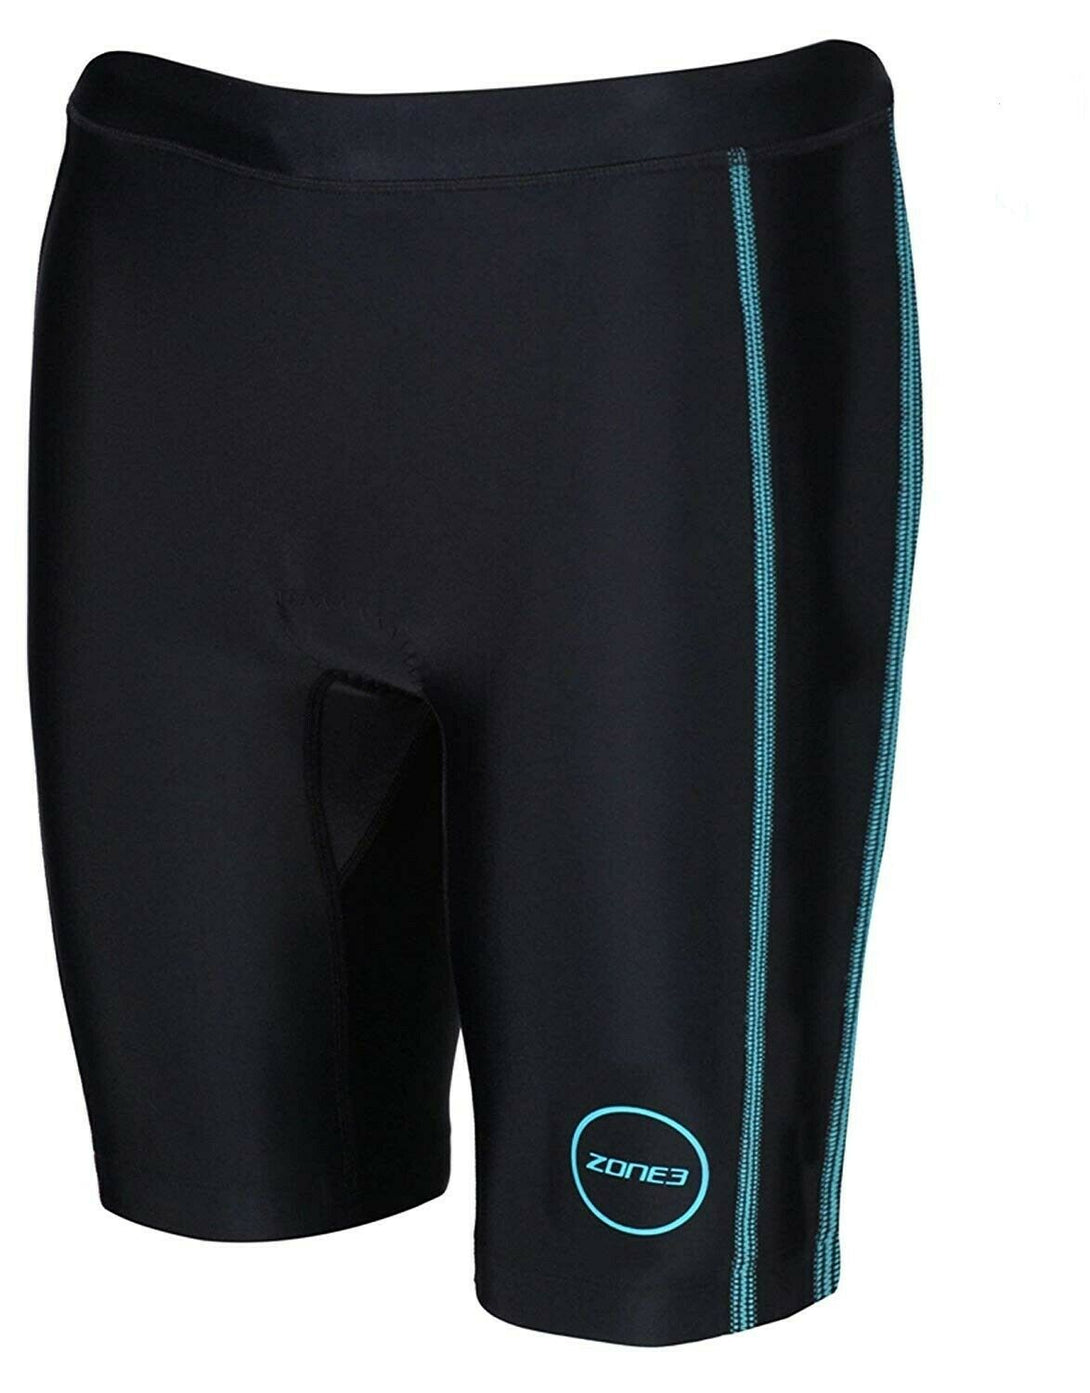 Zone 3 Women's Activate Shorts